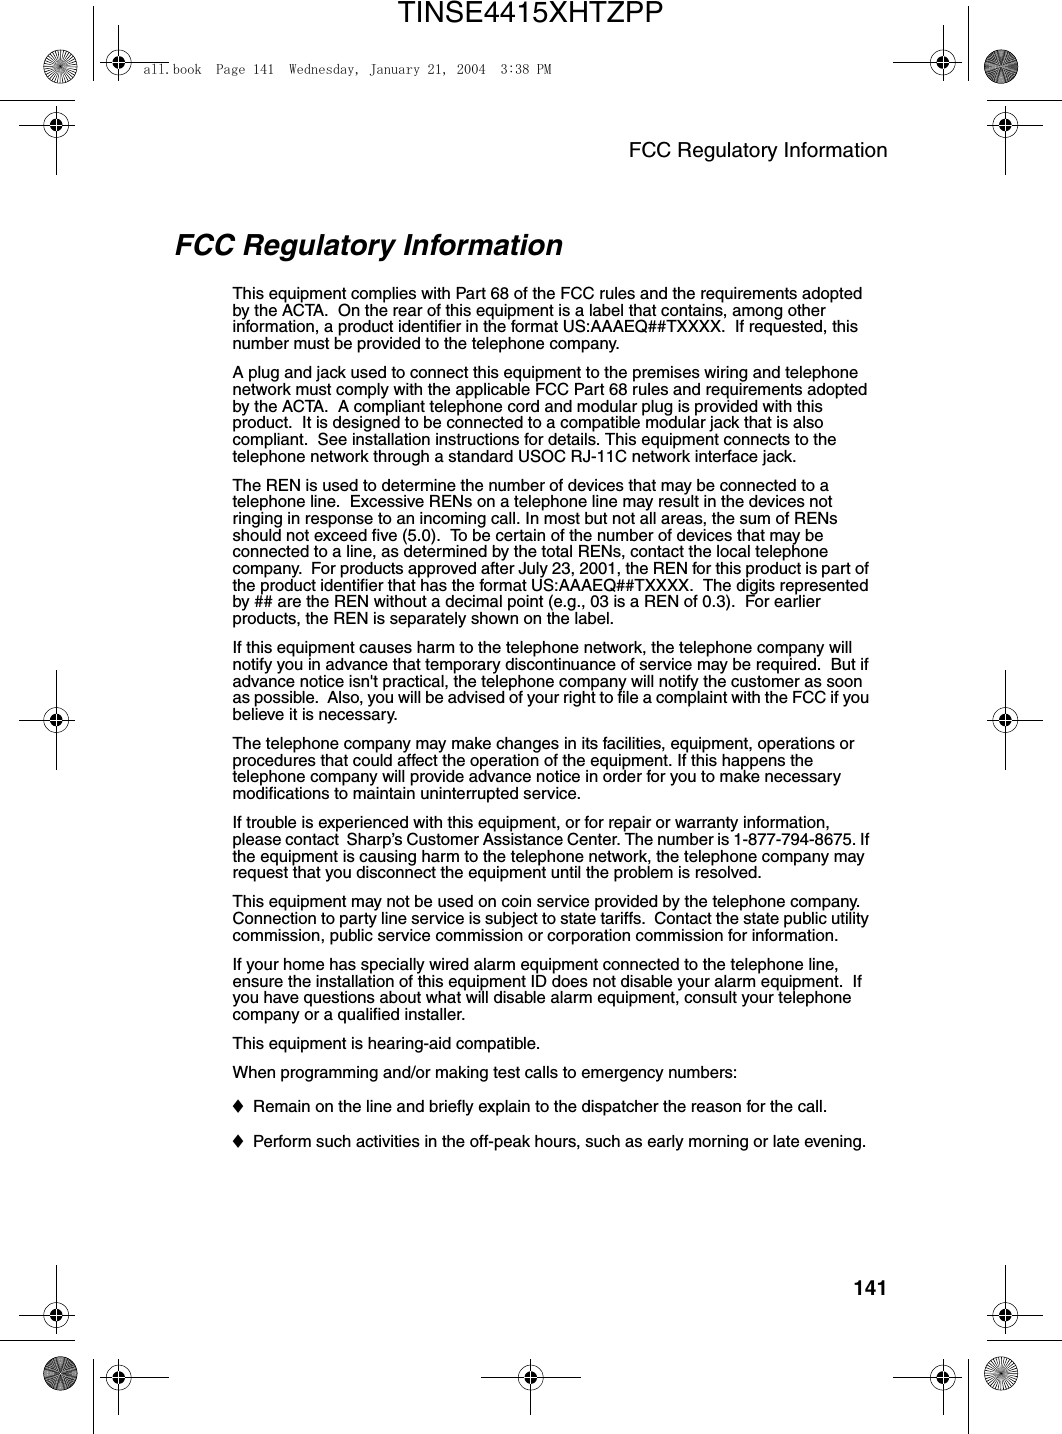 FCC Regulatory Information141FCC Regulatory InformationThis equipment complies with Part 68 of the FCC rules and the requirements adopted by the ACTA.  On the rear of this equipment is a label that contains, among other information, a product identifier in the format US:AAAEQ##TXXXX.  If requested, this number must be provided to the telephone company. A plug and jack used to connect this equipment to the premises wiring and telephone network must comply with the applicable FCC Part 68 rules and requirements adopted by the ACTA.  A compliant telephone cord and modular plug is provided with this product.  It is designed to be connected to a compatible modular jack that is also compliant.  See installation instructions for details. This equipment connects to the telephone network through a standard USOC RJ-11C network interface jack. The REN is used to determine the number of devices that may be connected to a telephone line.  Excessive RENs on a telephone line may result in the devices not ringing in response to an incoming call. In most but not all areas, the sum of RENs should not exceed five (5.0).  To be certain of the number of devices that may be connected to a line, as determined by the total RENs, contact the local telephone company.  For products approved after July 23, 2001, the REN for this product is part of the product identifier that has the format US:AAAEQ##TXXXX.  The digits represented by ## are the REN without a decimal point (e.g., 03 is a REN of 0.3).  For earlier products, the REN is separately shown on the label. If this equipment causes harm to the telephone network, the telephone company will notify you in advance that temporary discontinuance of service may be required.  But if advance notice isn&apos;t practical, the telephone company will notify the customer as soon as possible.  Also, you will be advised of your right to file a complaint with the FCC if you believe it is necessary. The telephone company may make changes in its facilities, equipment, operations or procedures that could affect the operation of the equipment. If this happens the telephone company will provide advance notice in order for you to make necessary modifications to maintain uninterrupted service. If trouble is experienced with this equipment, or for repair or warranty information, please contact  Sharp’s Customer Assistance Center. The number is 1-877-794-8675. If the equipment is causing harm to the telephone network, the telephone company may request that you disconnect the equipment until the problem is resolved.This equipment may not be used on coin service provided by the telephone company. Connection to party line service is subject to state tariffs.  Contact the state public utility commission, public service commission or corporation commission for information. If your home has specially wired alarm equipment connected to the telephone line, ensure the installation of this equipment ID does not disable your alarm equipment.  If you have questions about what will disable alarm equipment, consult your telephone company or a qualified installer.This equipment is hearing-aid compatible. When programming and/or making test calls to emergency numbers: ♦Remain on the line and briefly explain to the dispatcher the reason for the call. ♦Perform such activities in the off-peak hours, such as early morning or late evening. all.book  Page 141  Wednesday, January 21, 2004  3:38 PMTINSE4415XHTZPP